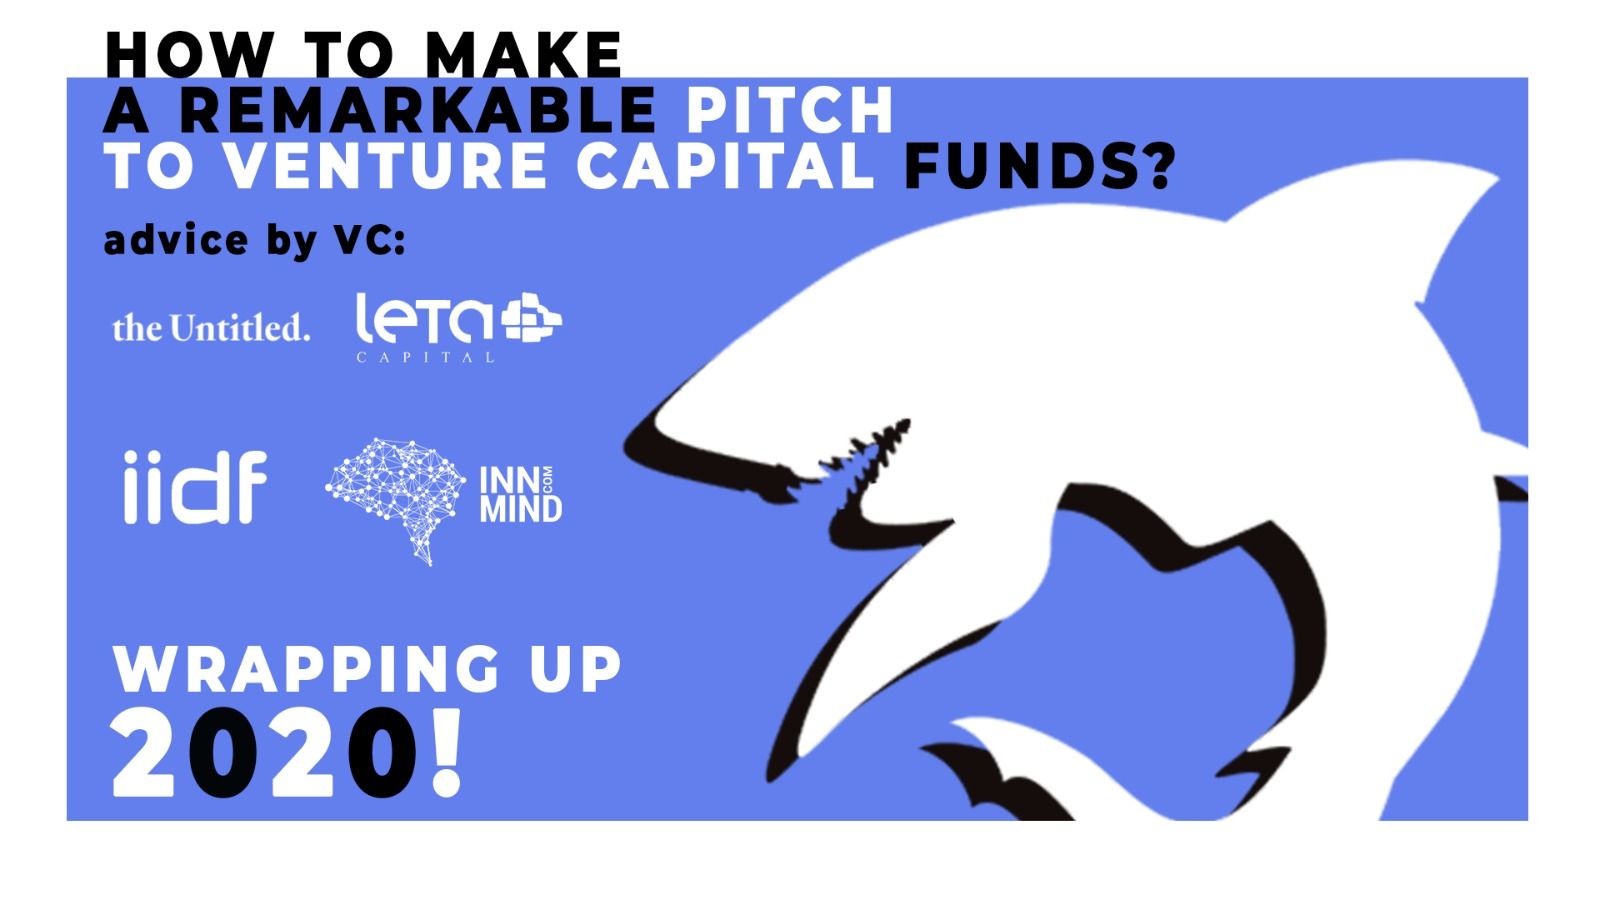 How to make a remarkable pitch to Venture Capital funds